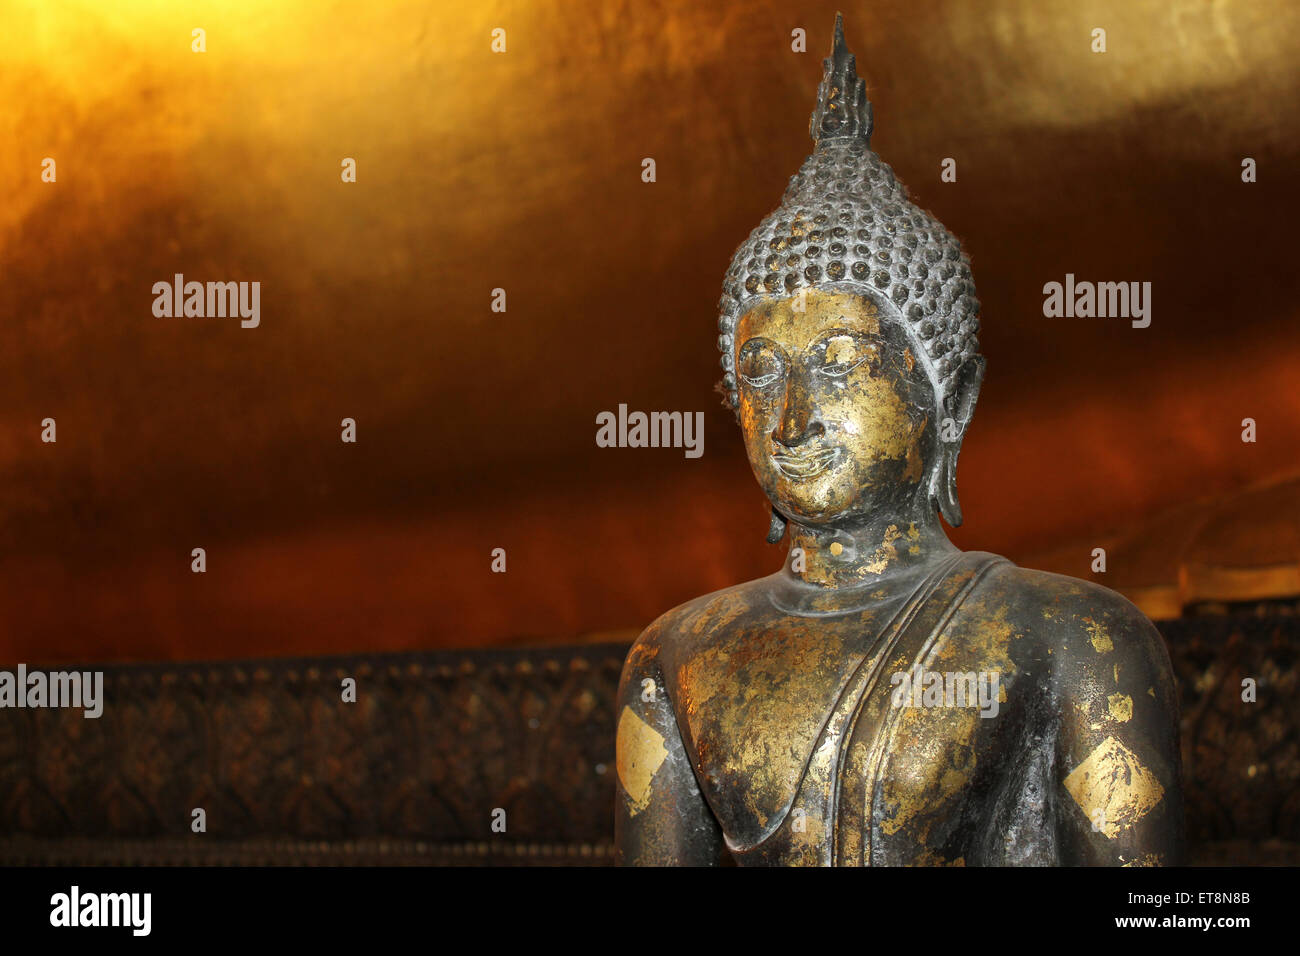 Buddha Statue In Wat Pho Temple, Thailand Stock Photo